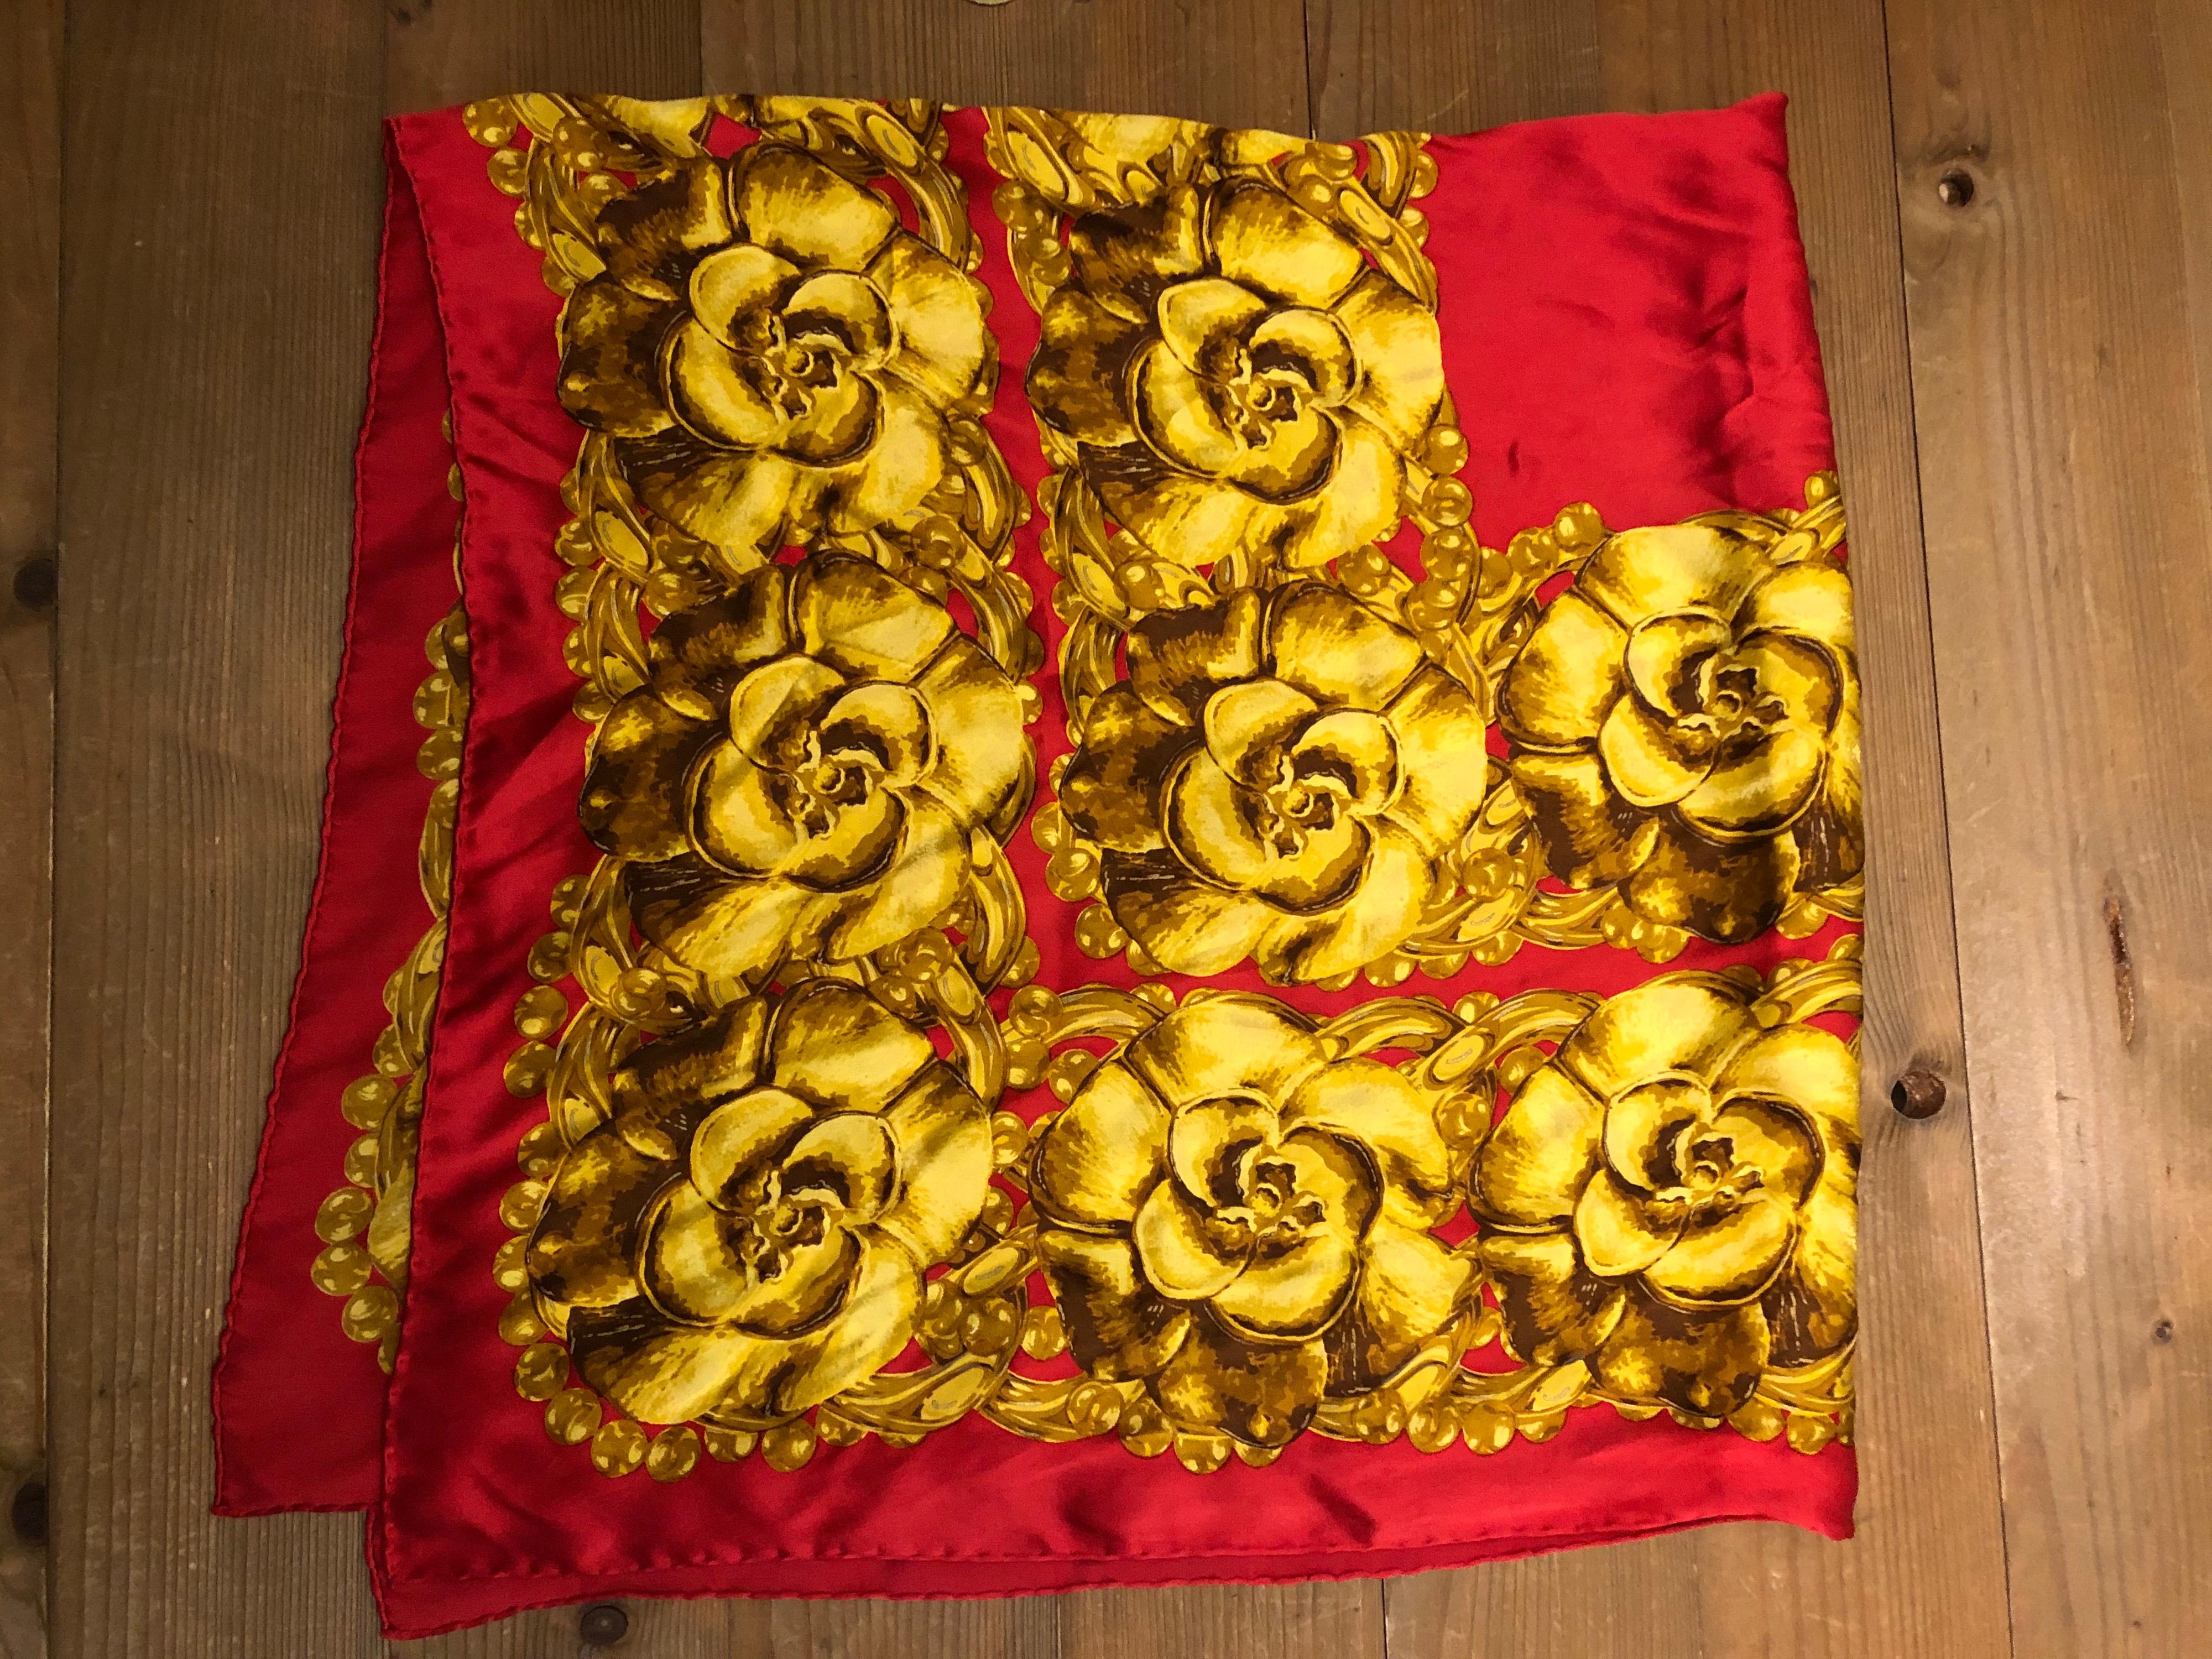 Brown 1990s Vintage CHANEL Red Gold Camellia Silk Scarf